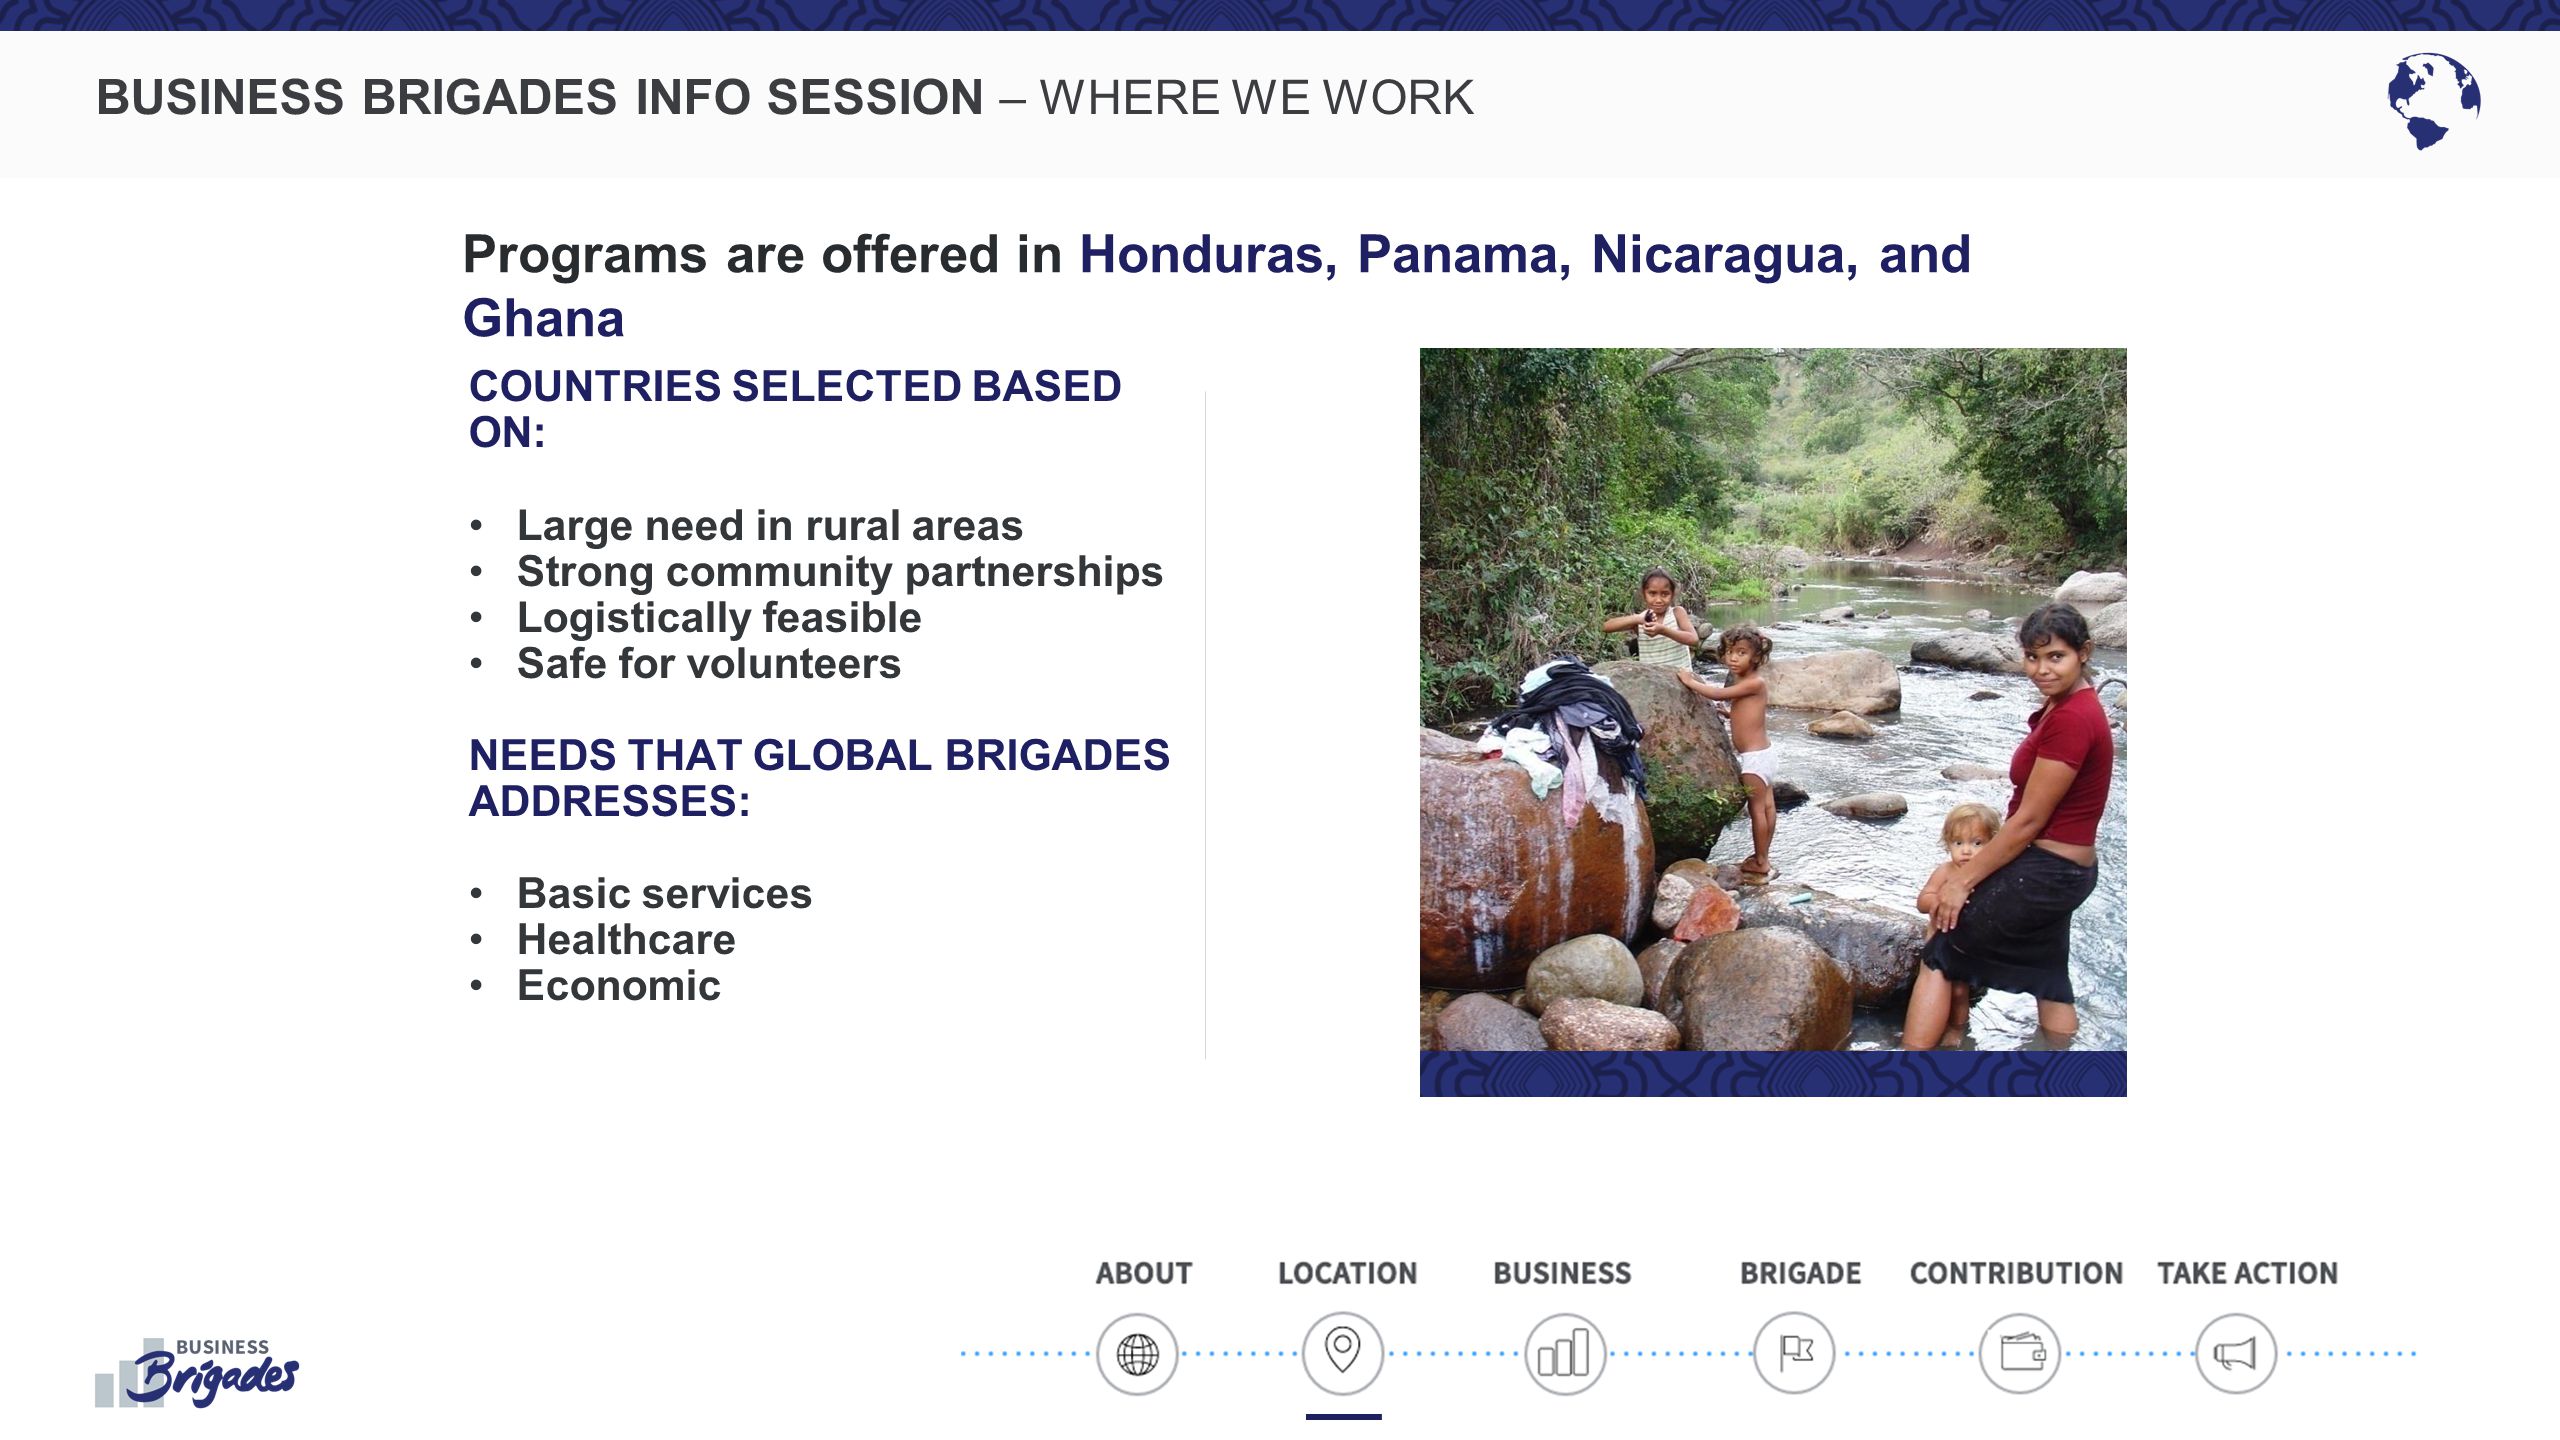 BUSINESS BRIGADES INFO SESSION – WHERE WE WORK COUNTRIES SELECTED BASED ON: Large need in rural areas Strong community partnerships Logistically feasible Safe for volunteers NEEDS THAT GLOBAL BRIGADES ADDRESSES: Basic services Healthcare Economic Programs are offered in Honduras, Panama, Nicaragua, and Ghana